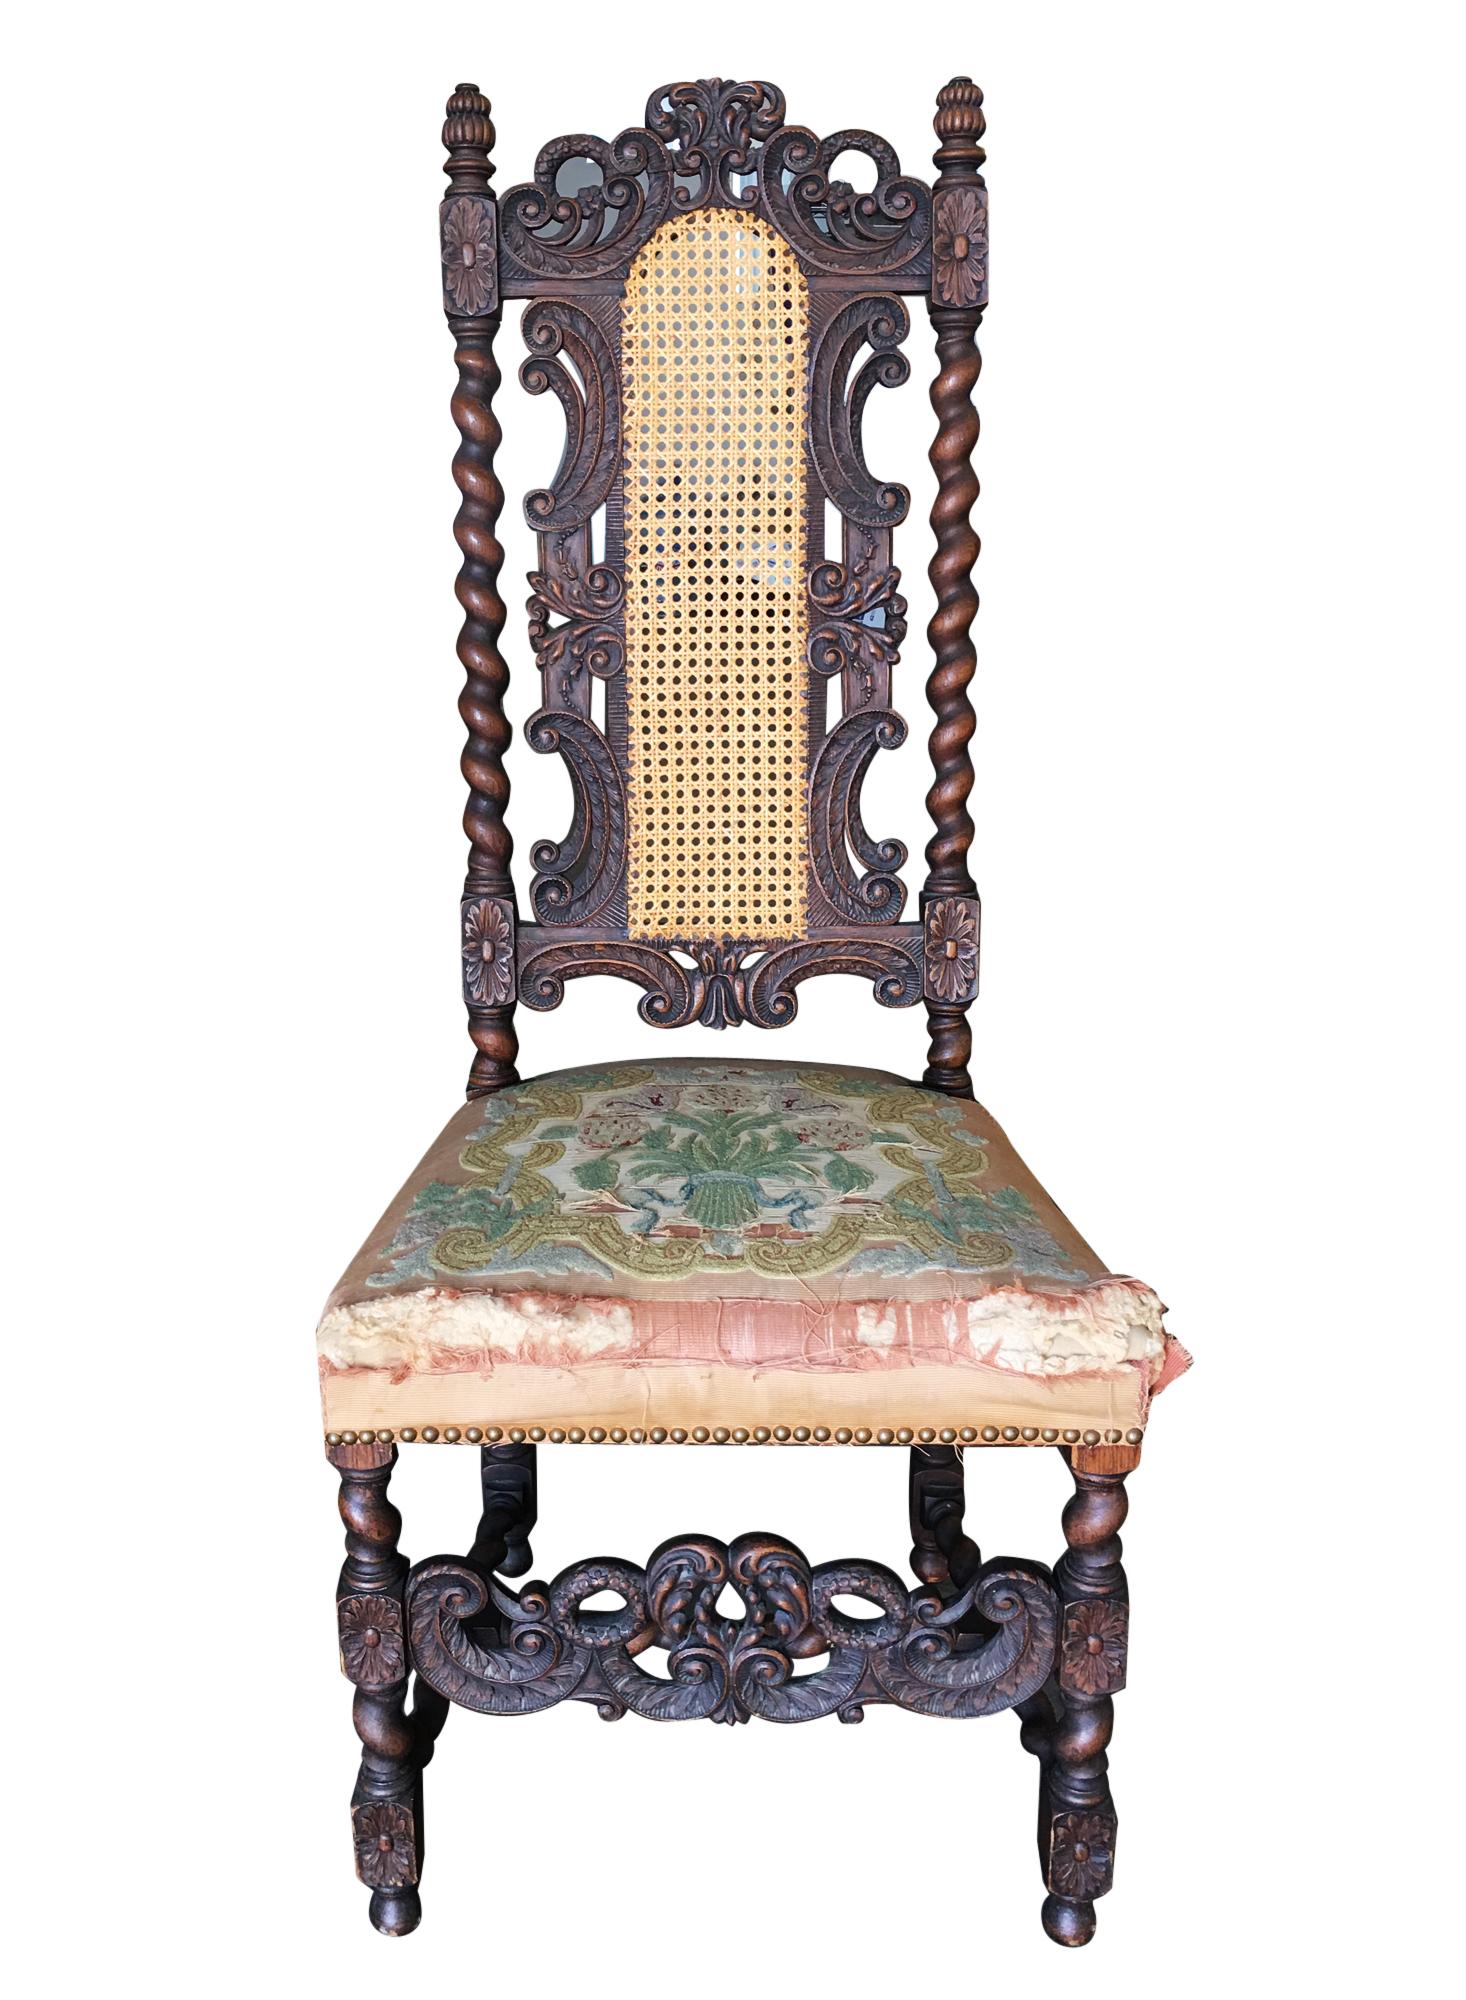 Victorian hand carved oak Gothic revival side throne chair with woven cane wicker back and needle point seat,

circa 1860.